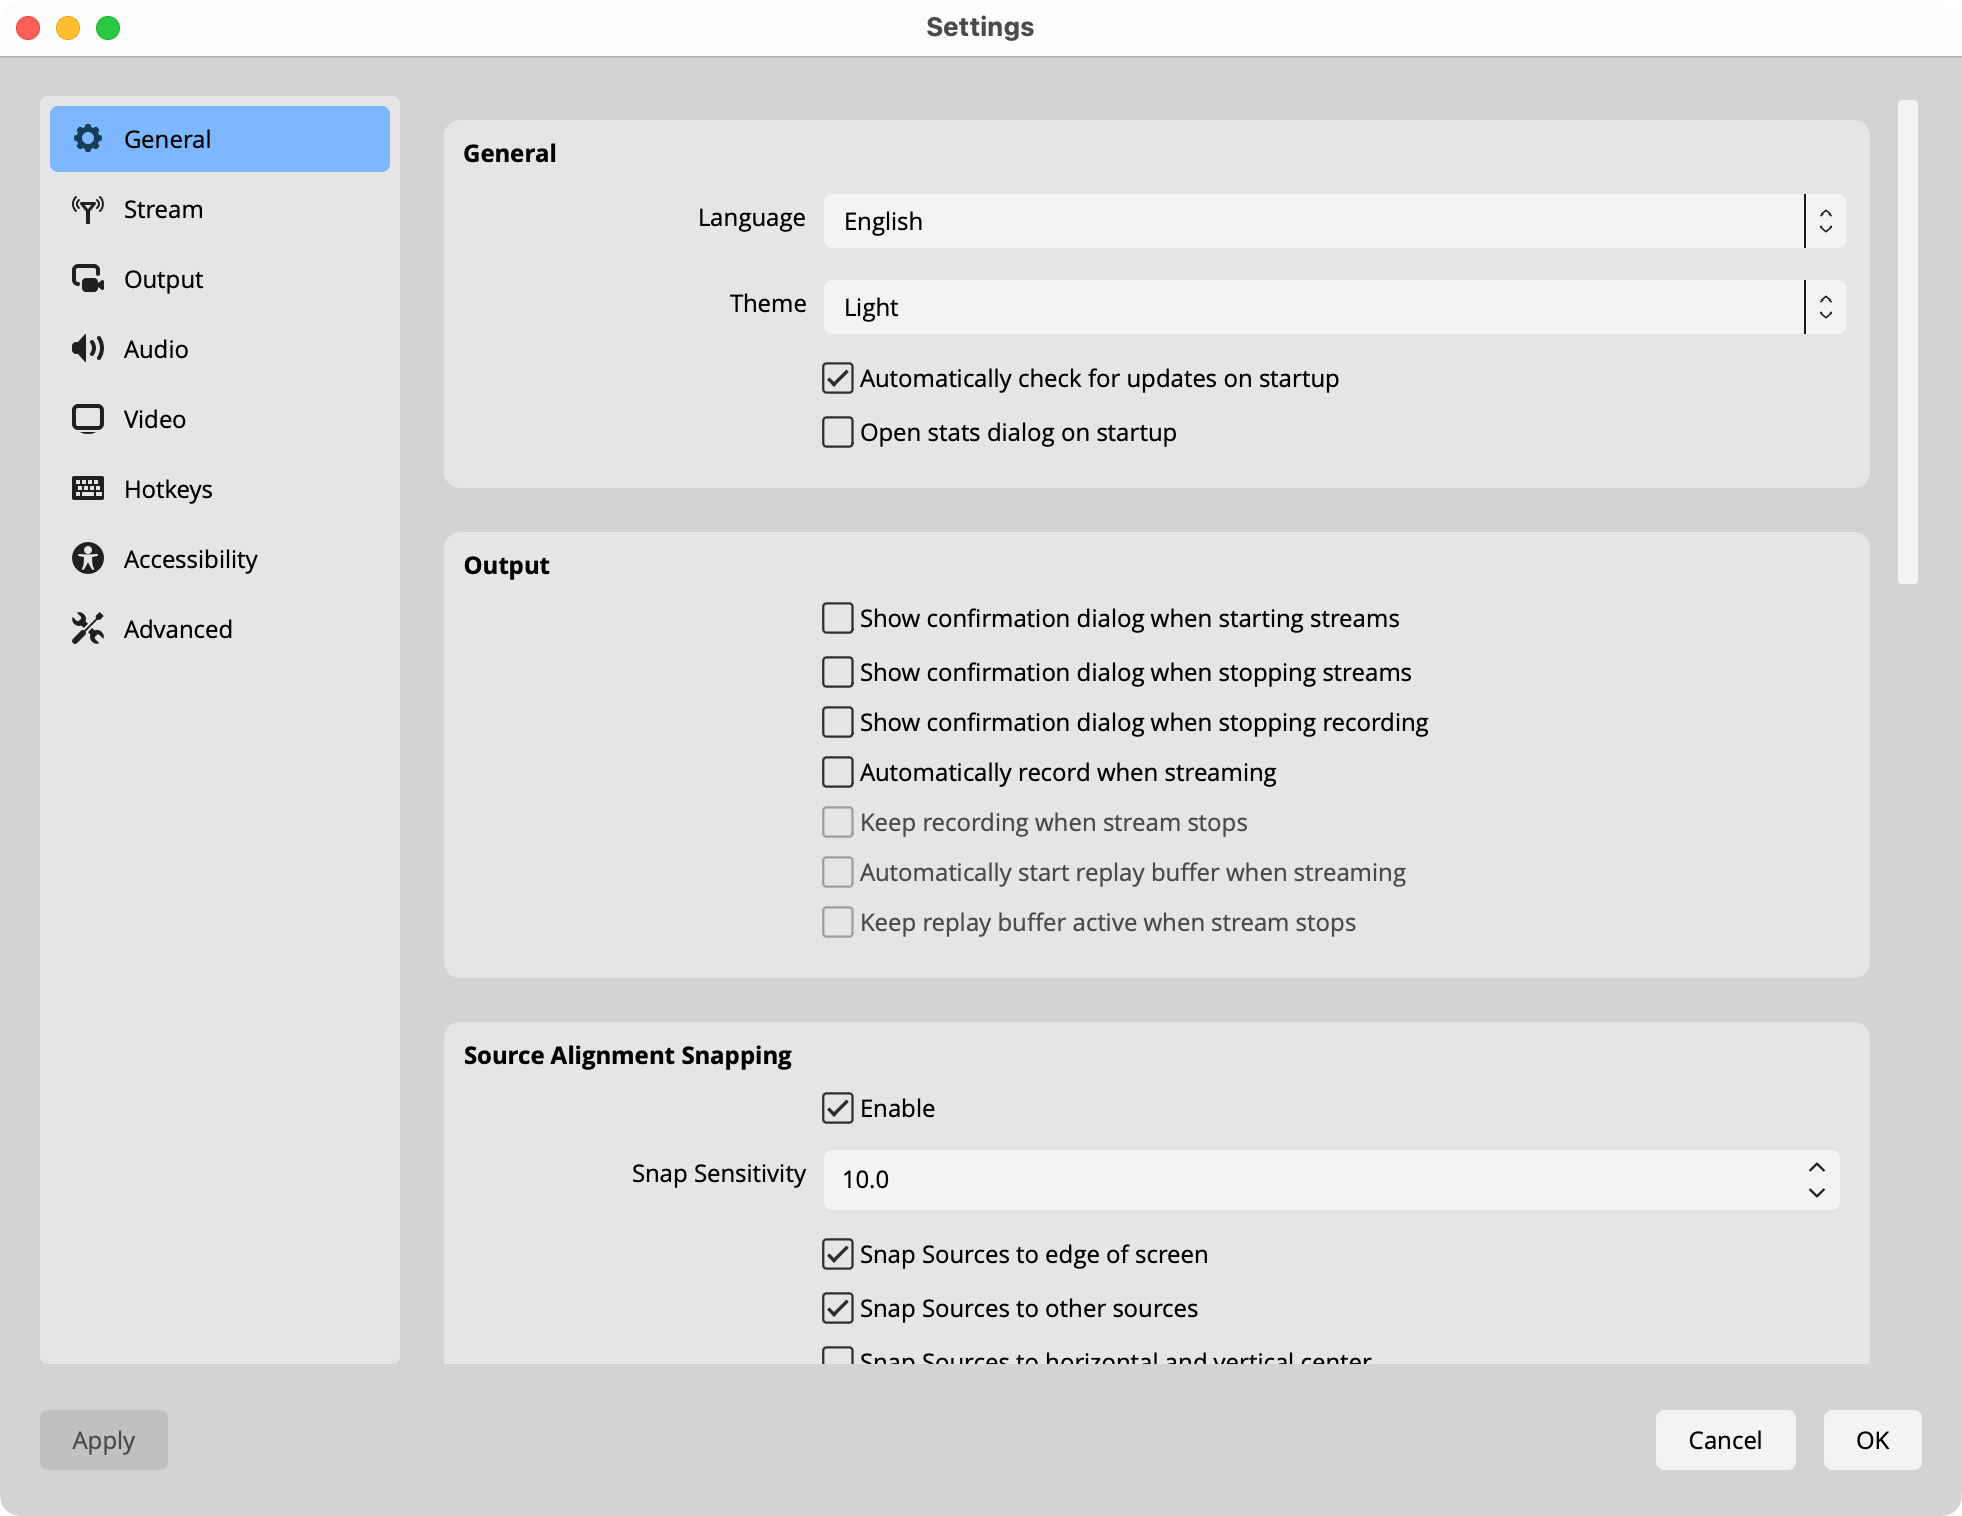 OBS Studio's settings window showing the Light theme